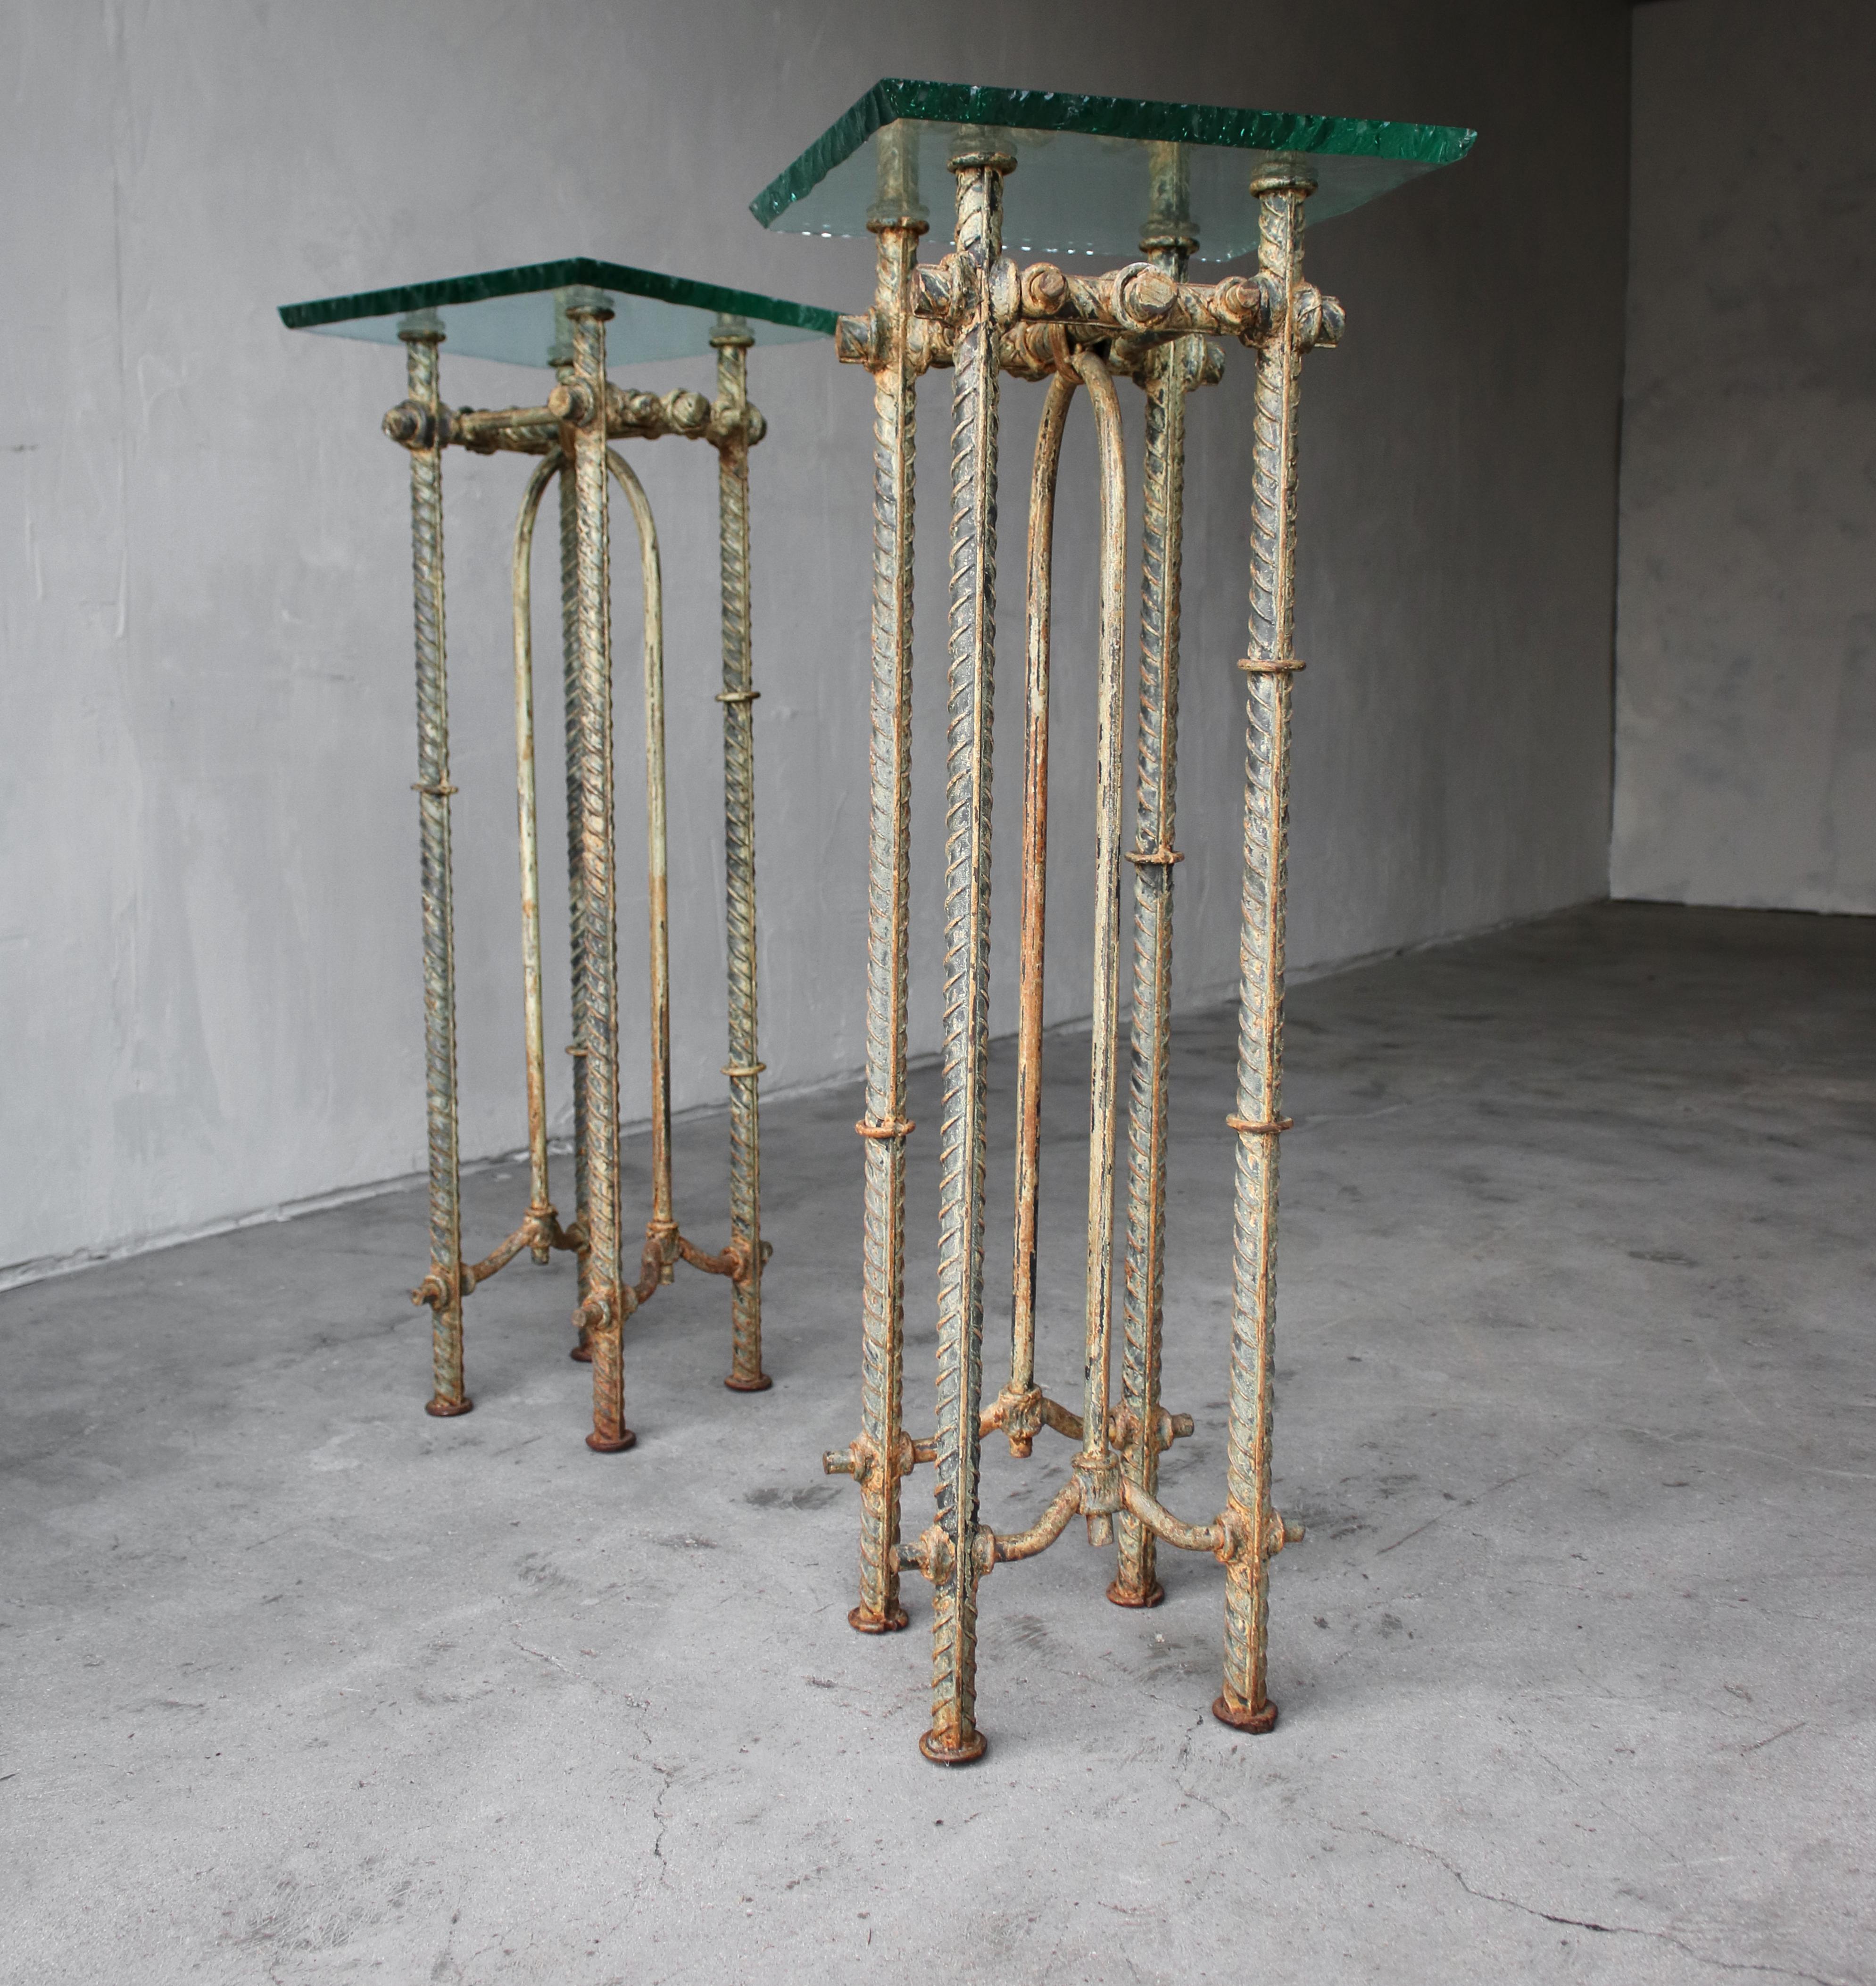 This gorgeous and rarely seen pair of Ilana Goor pedestals is nothing short of amazing. The handwrought frames and rough scalloped edge glass go unexpectedly well together.

Tables are heavy and in excellent condition.